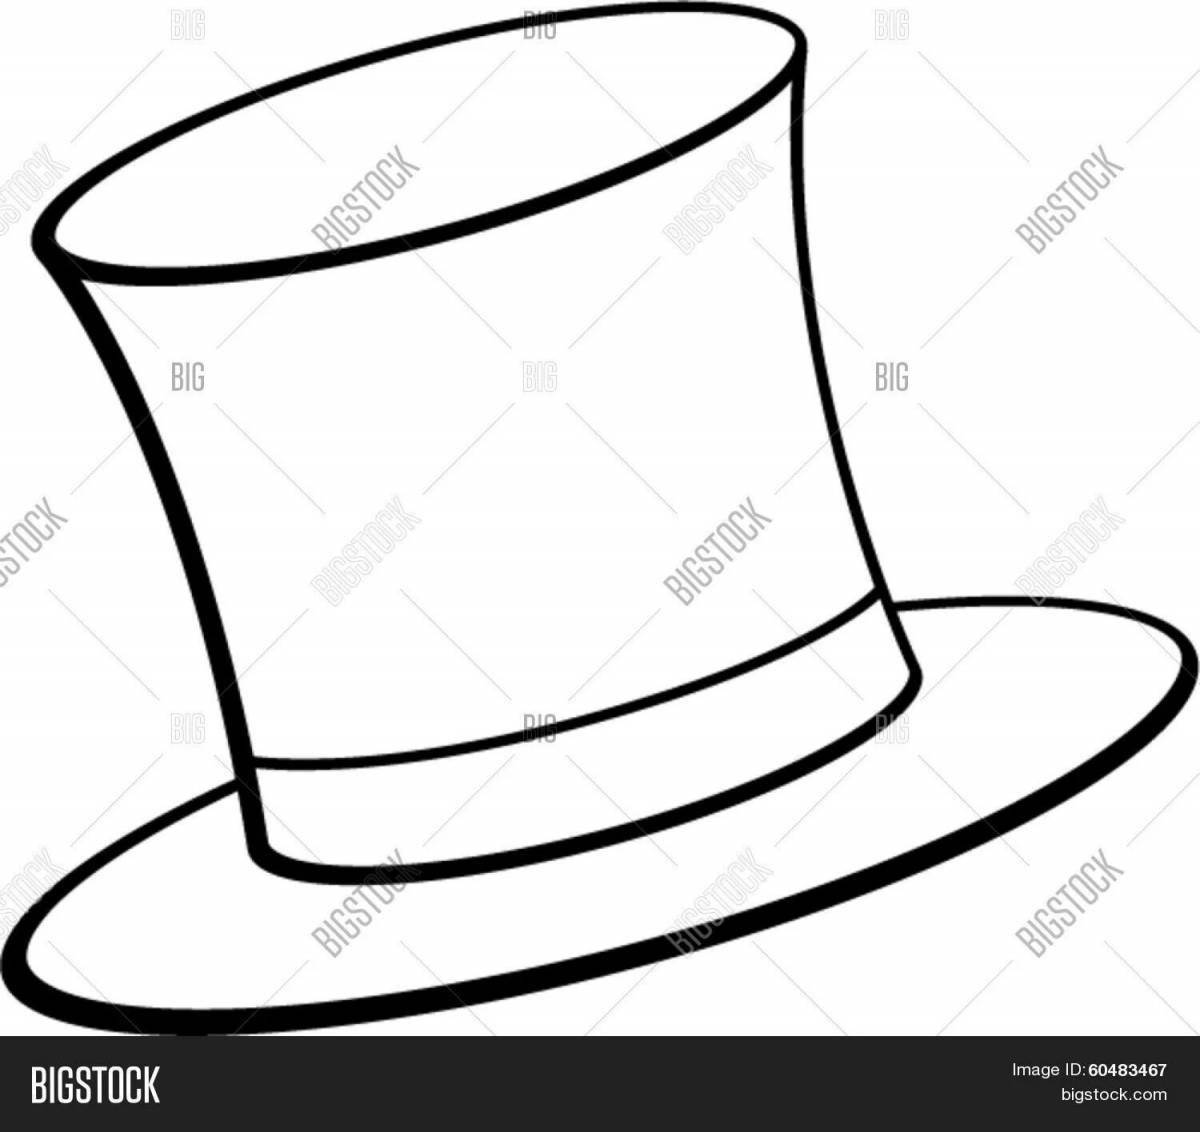 Fun coloring of the top hat